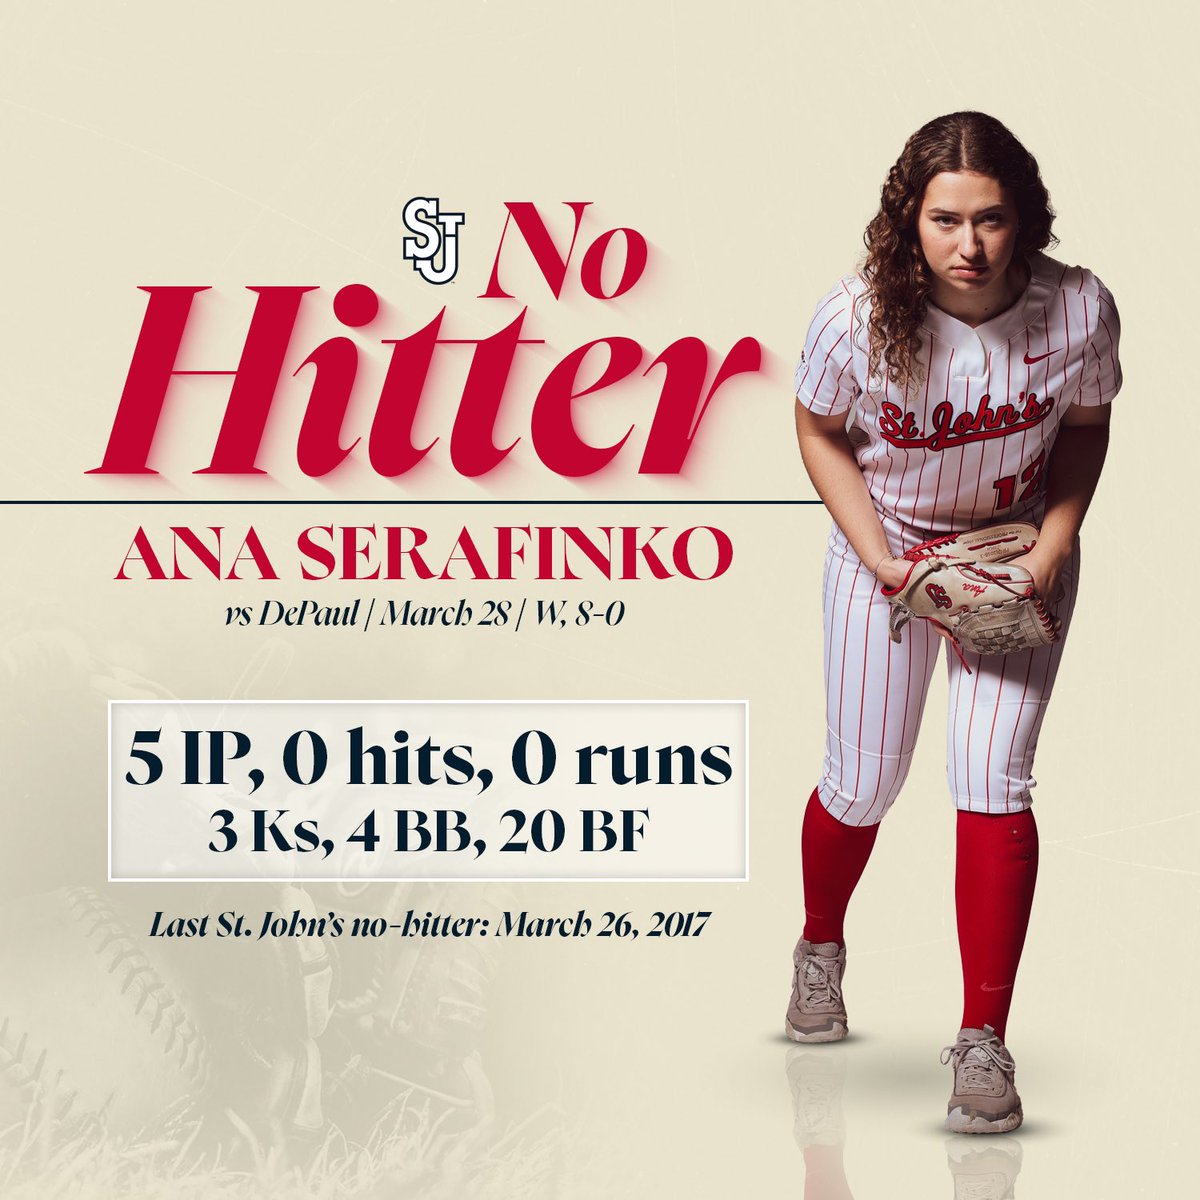 𝑯𝒊𝒔𝒕𝒐𝒓𝒚 𝑴𝒂𝒅𝒆 🤩 Ana Serafinko tosses the first Red Storm No-Hitter since March 26, 2017‼️